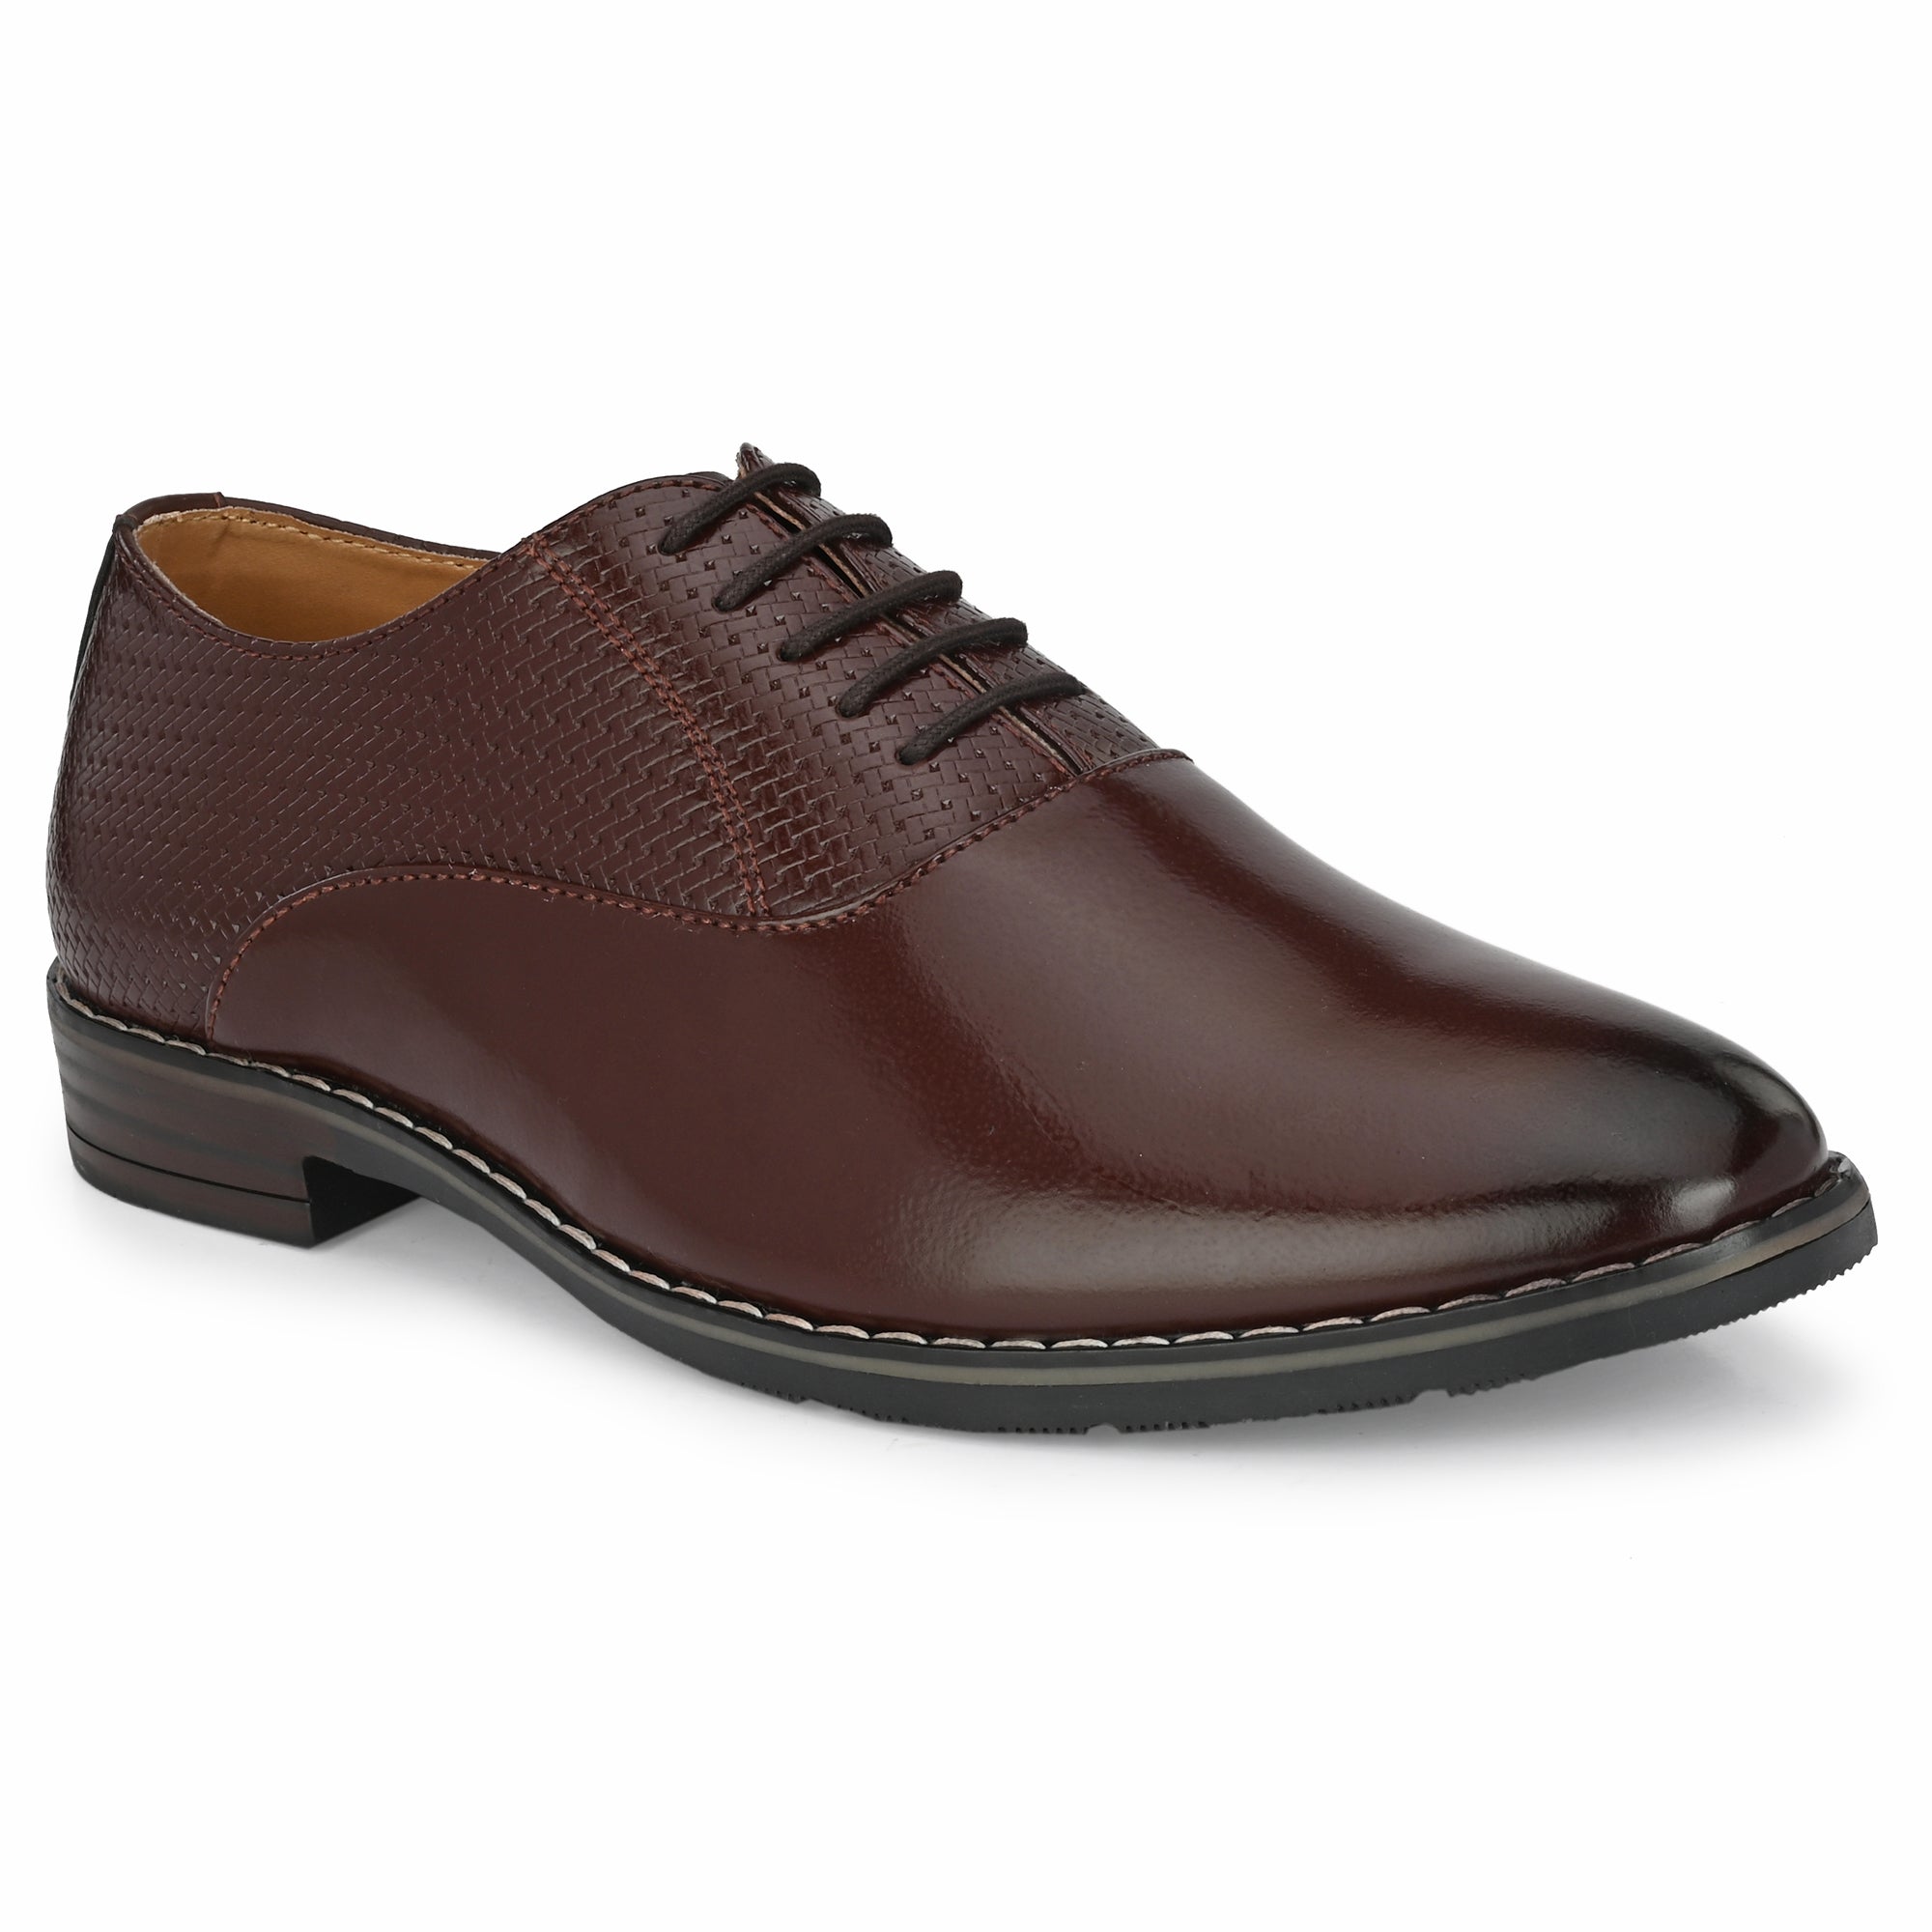 brown-formal-lace-up-attitudist-shoes-for-men-with-semi-chatai-design-sp6b